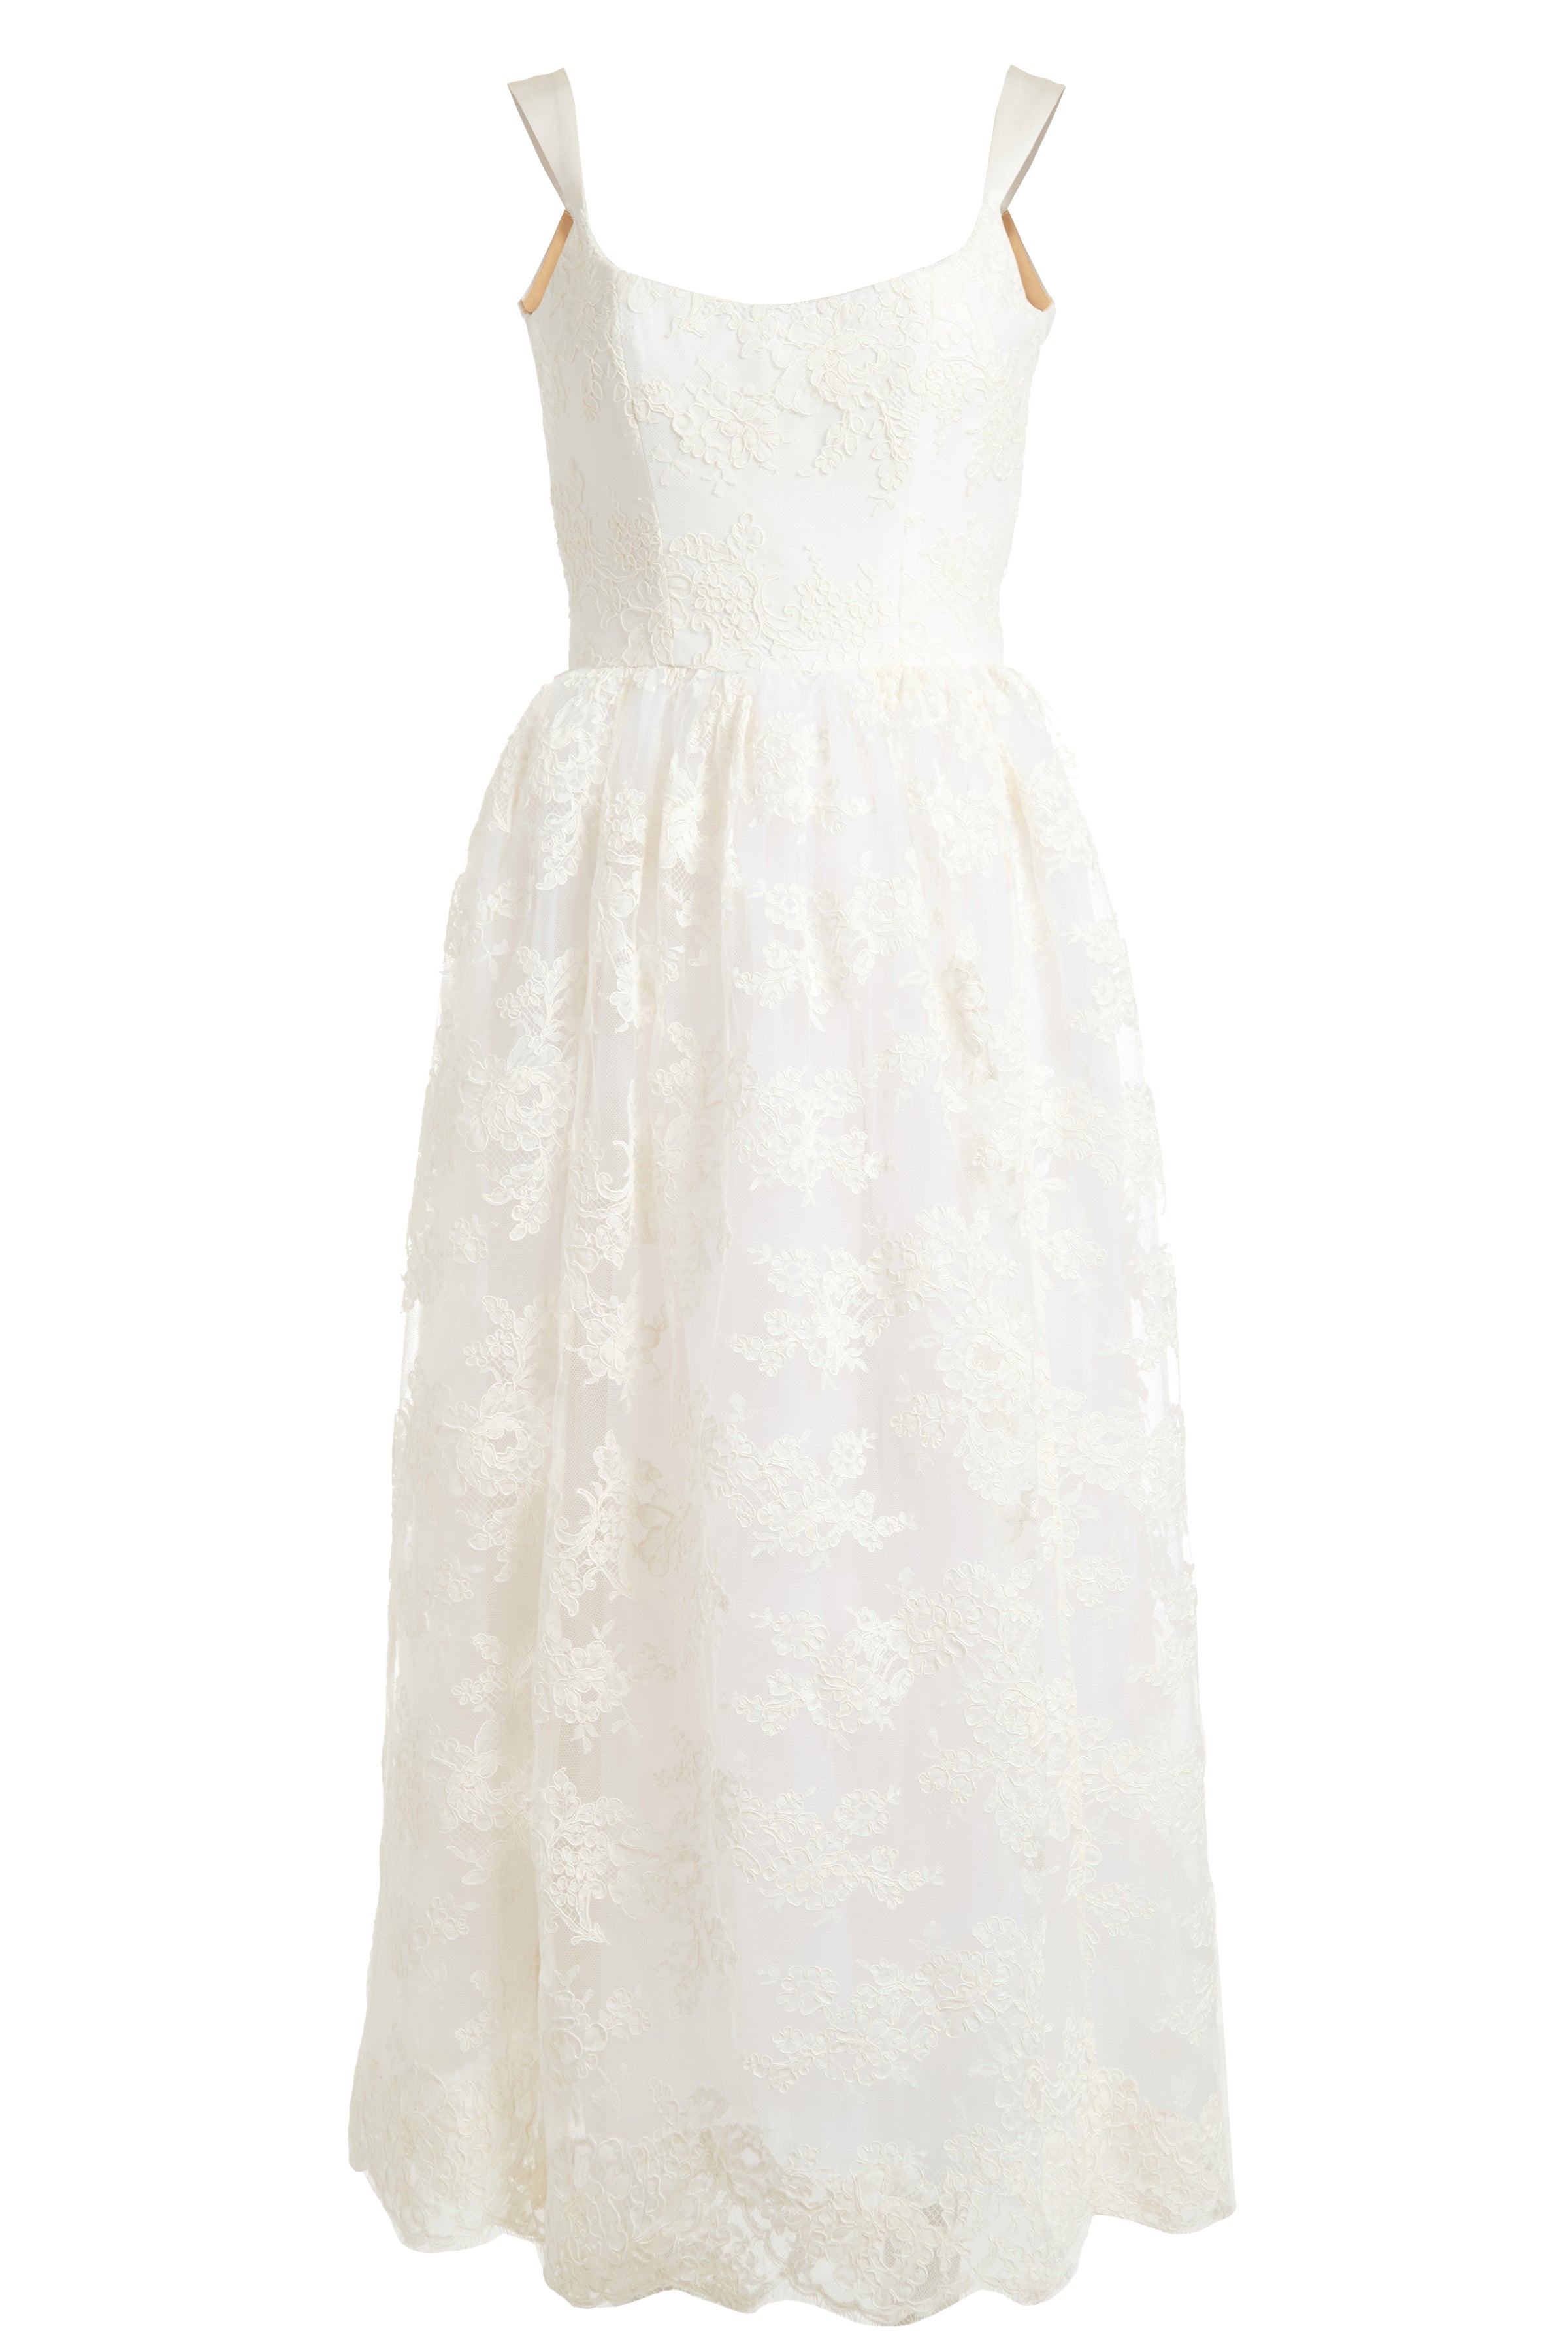 Apple White Lace Dress with Bow